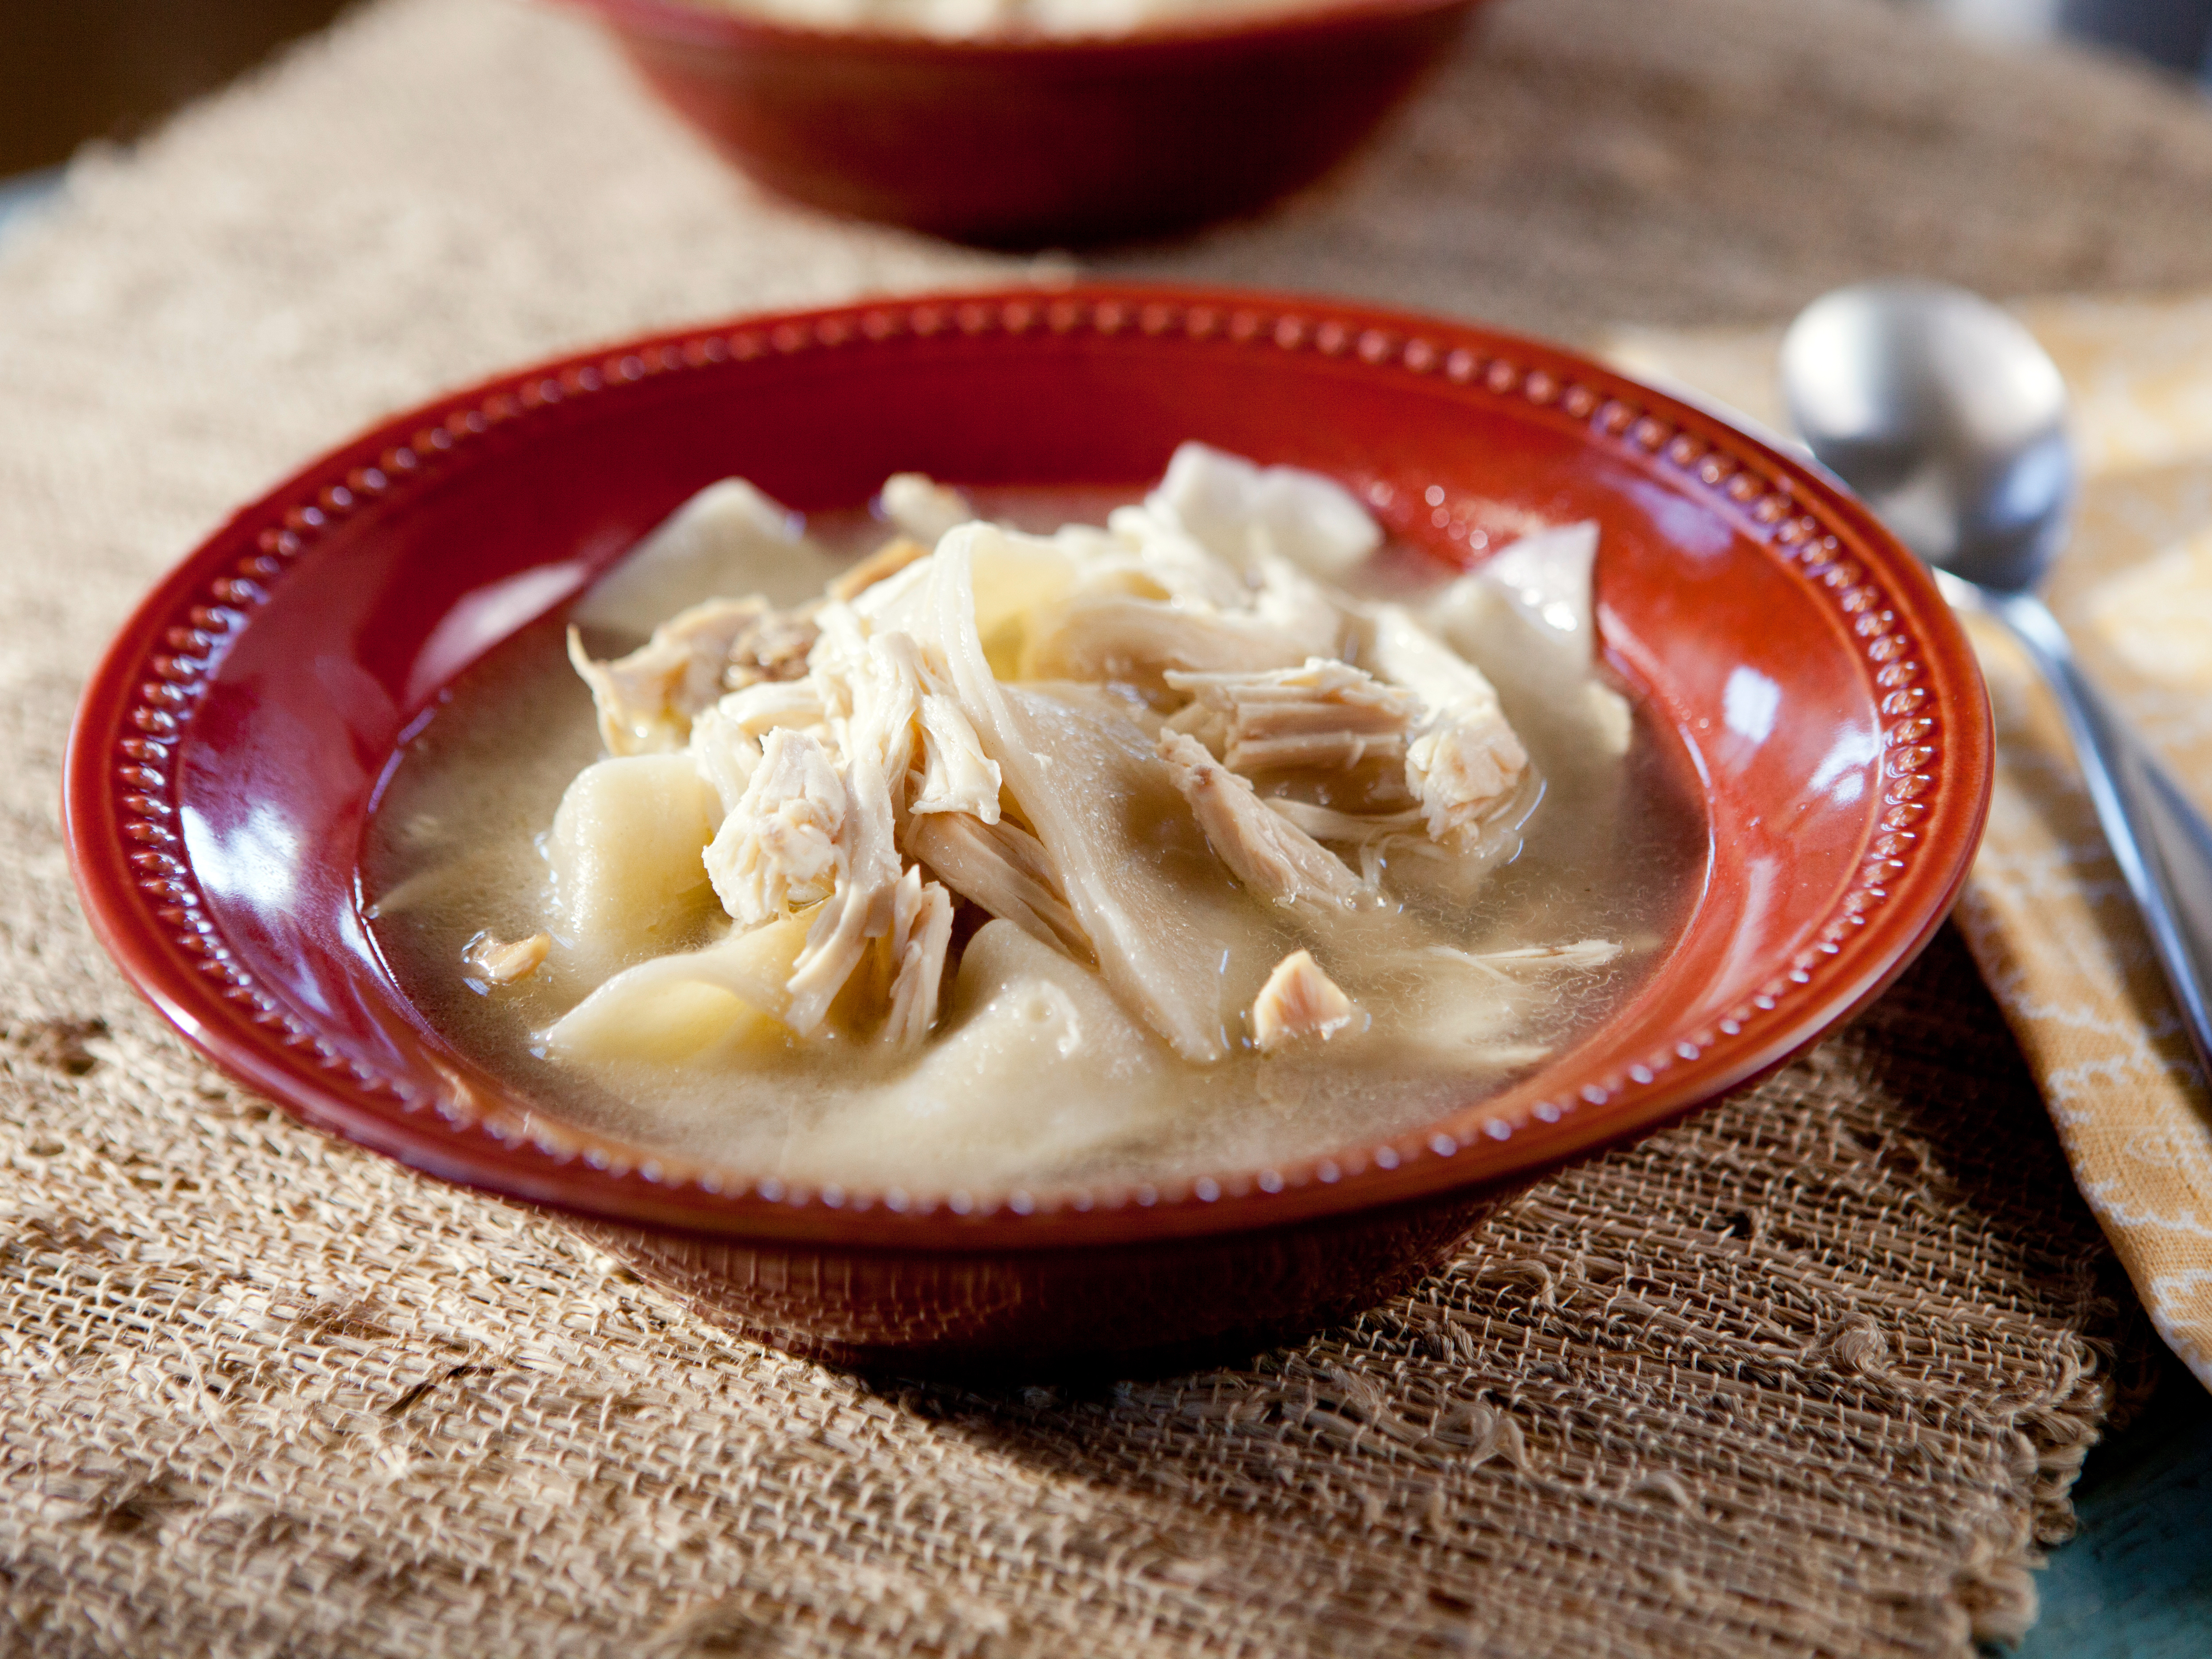 Grandmother's Southern Chicken 'n' Dumplings Recipe: How to Make It